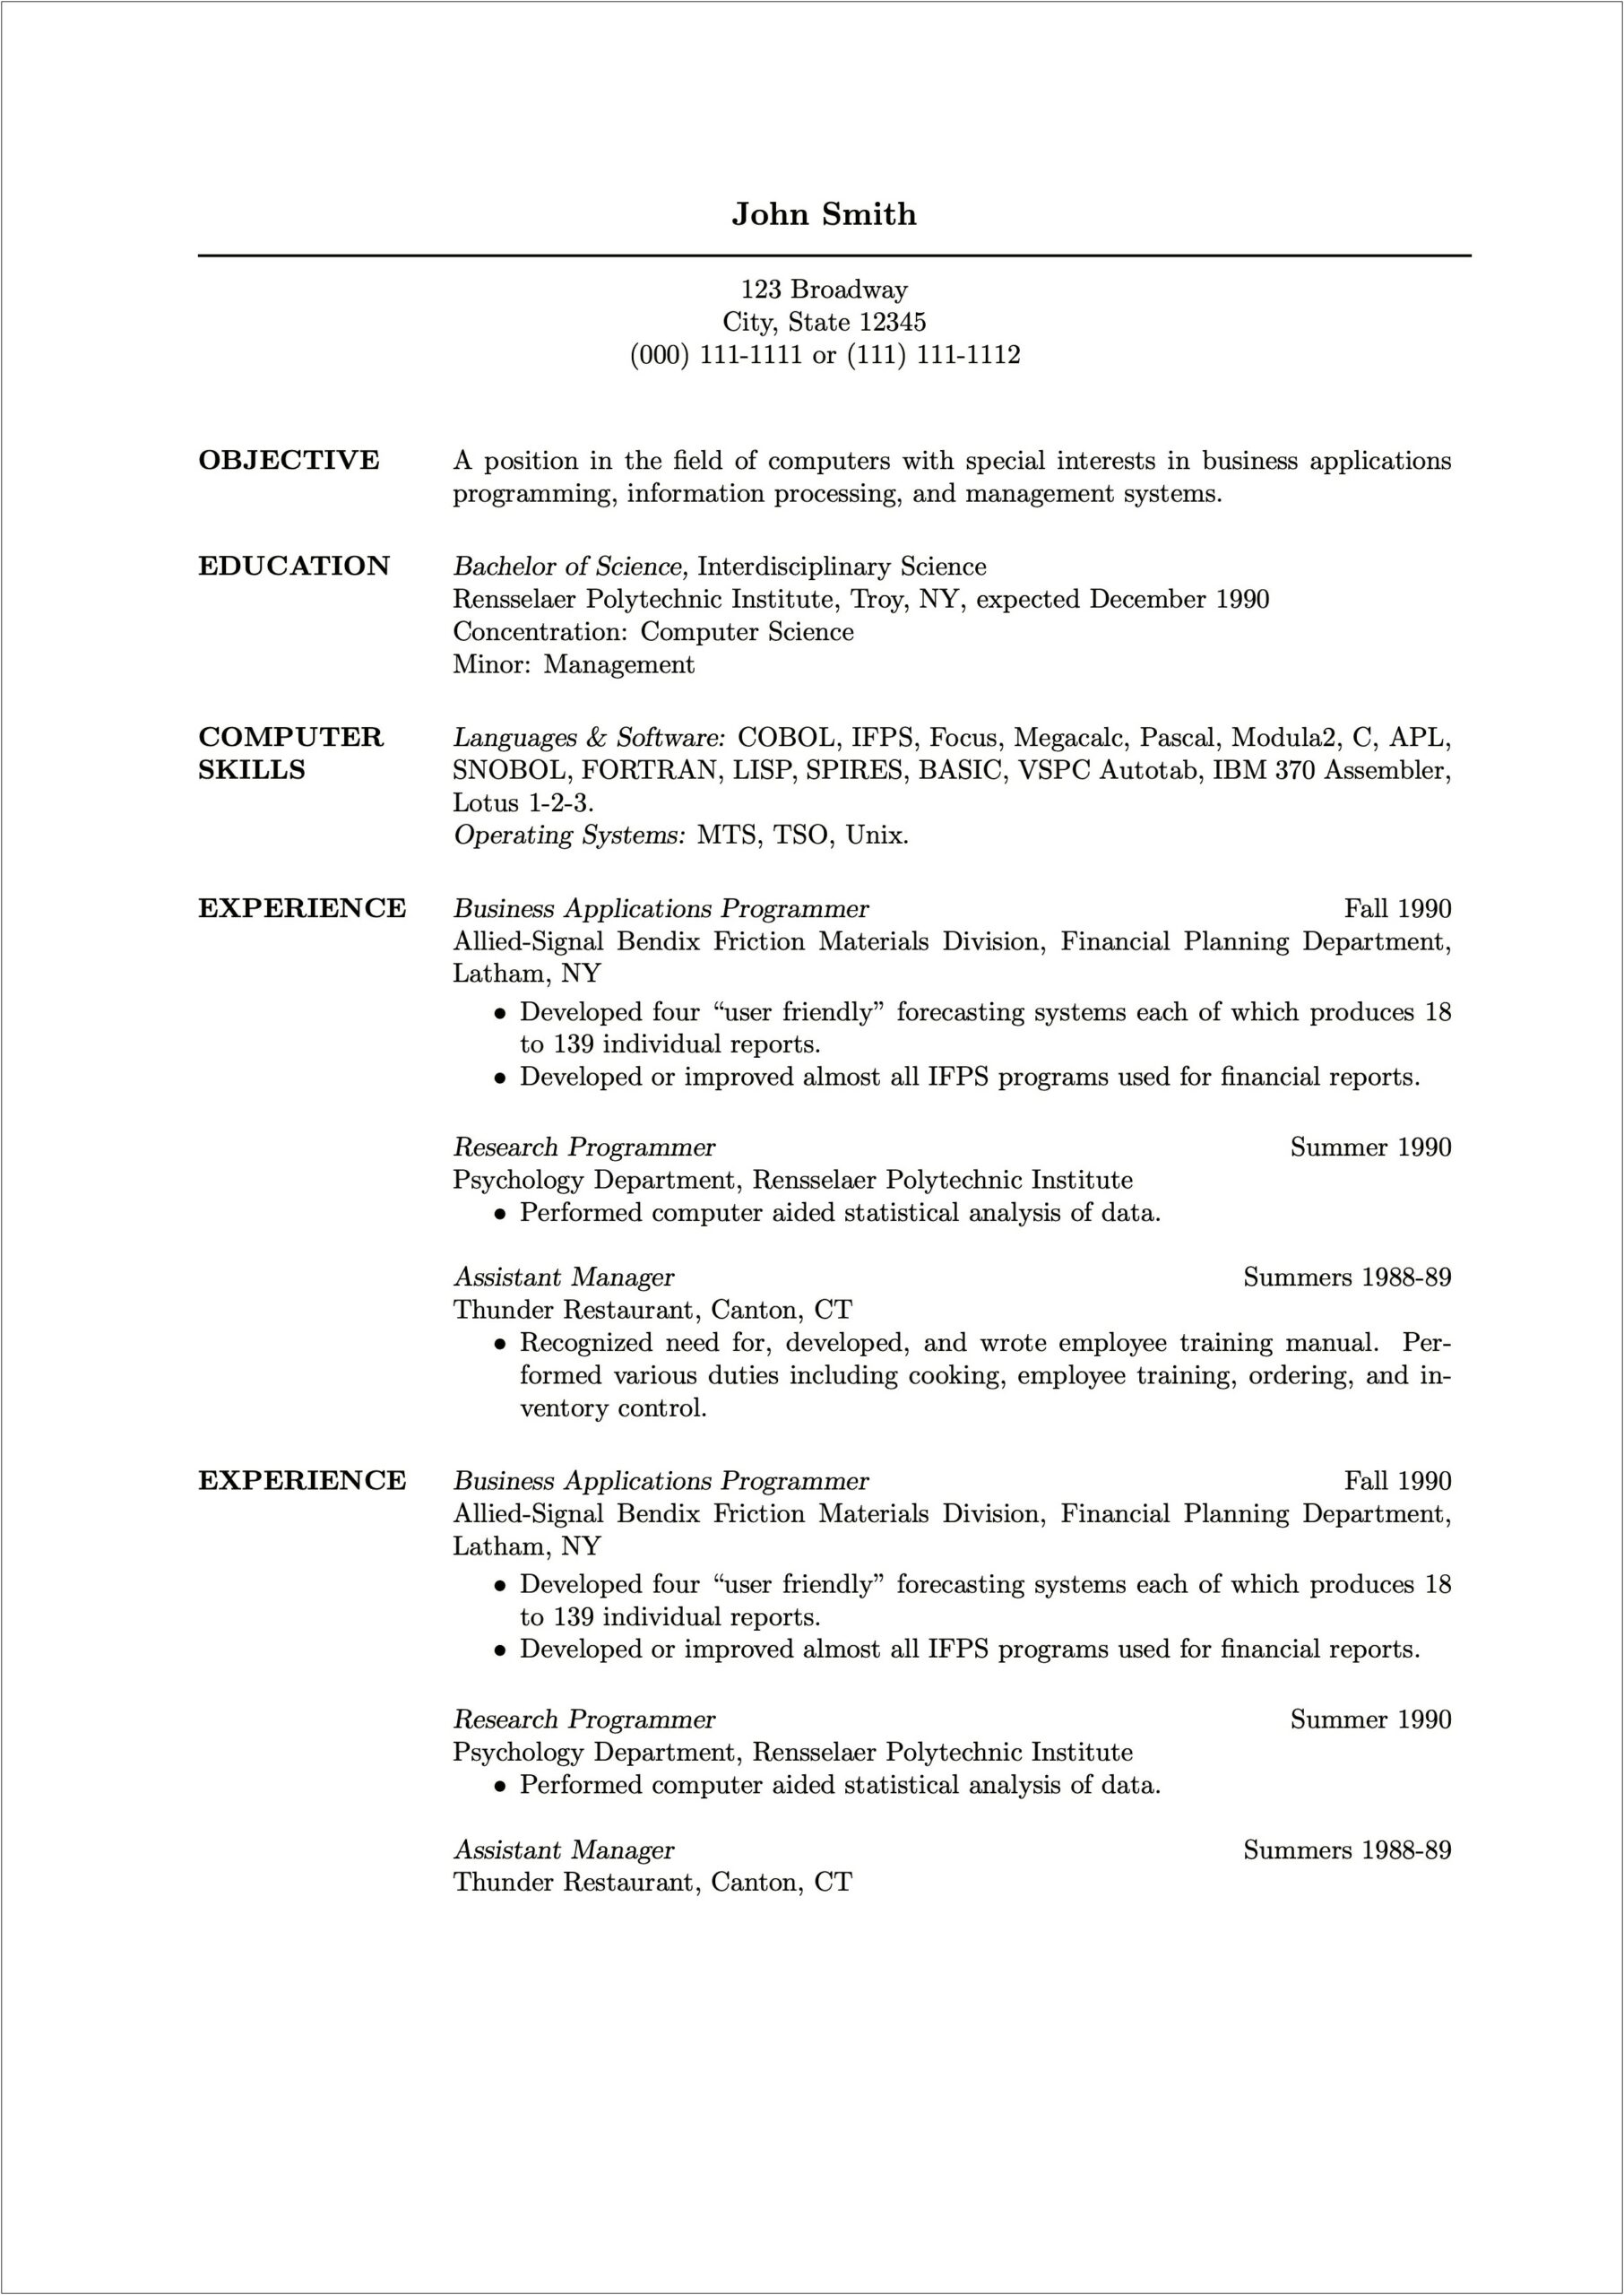 Resume Objectives For Computer Science Student